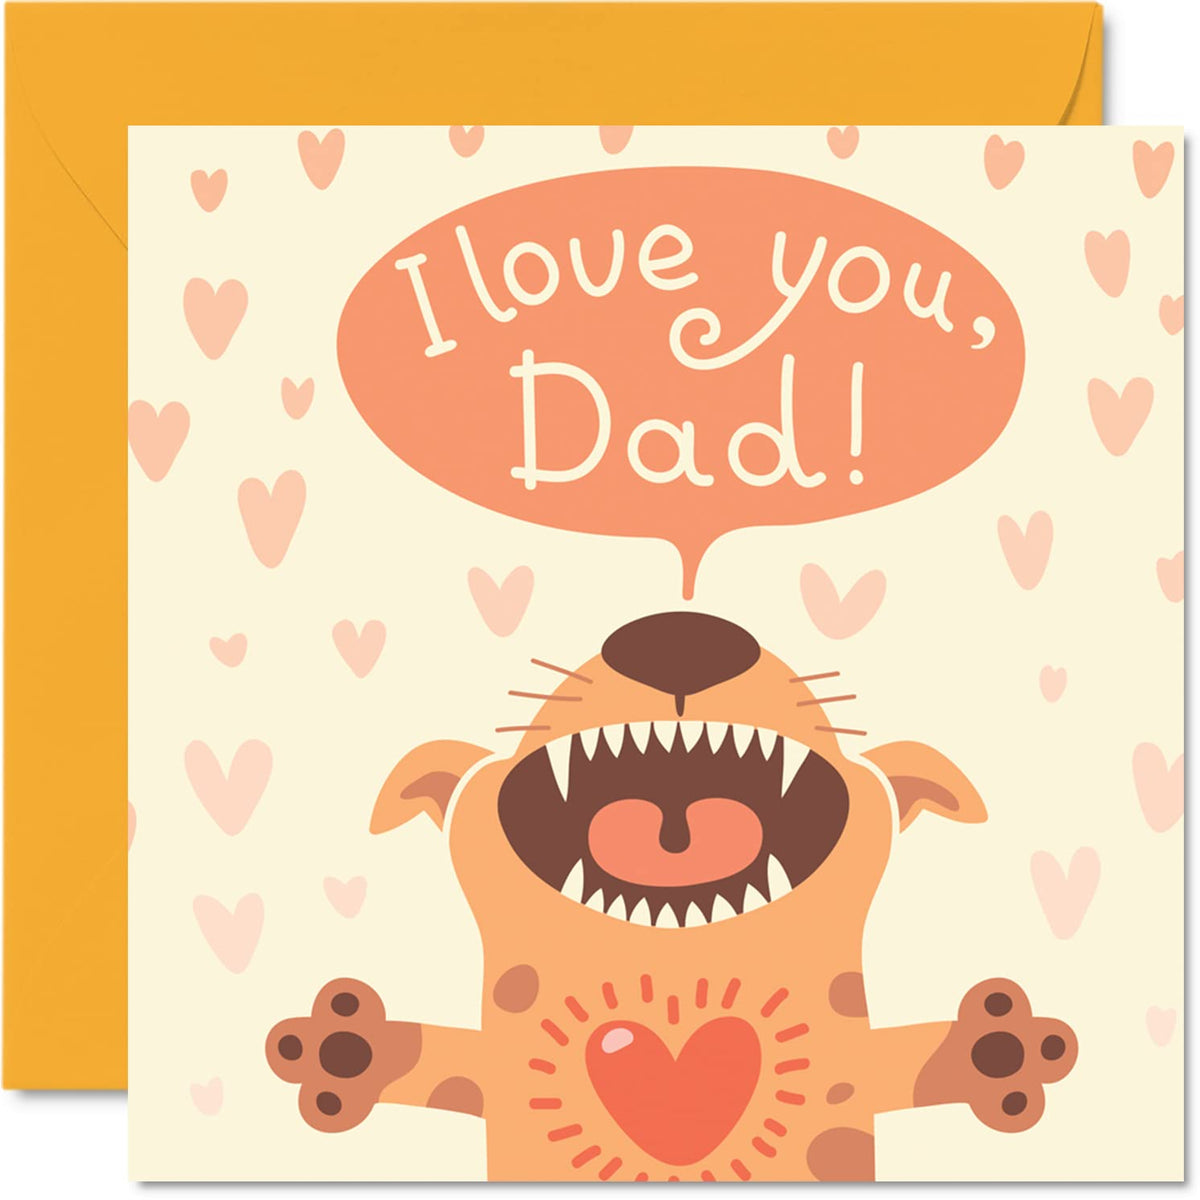 Birthday Cards for Dad from the Dog - I Love You Dad - Happy Birthday Card for Dad from the Dog, Father Birthday Gifts, 145mm x 145mm Father's Day Pet Greeting Cards Gift for Daddy Papa